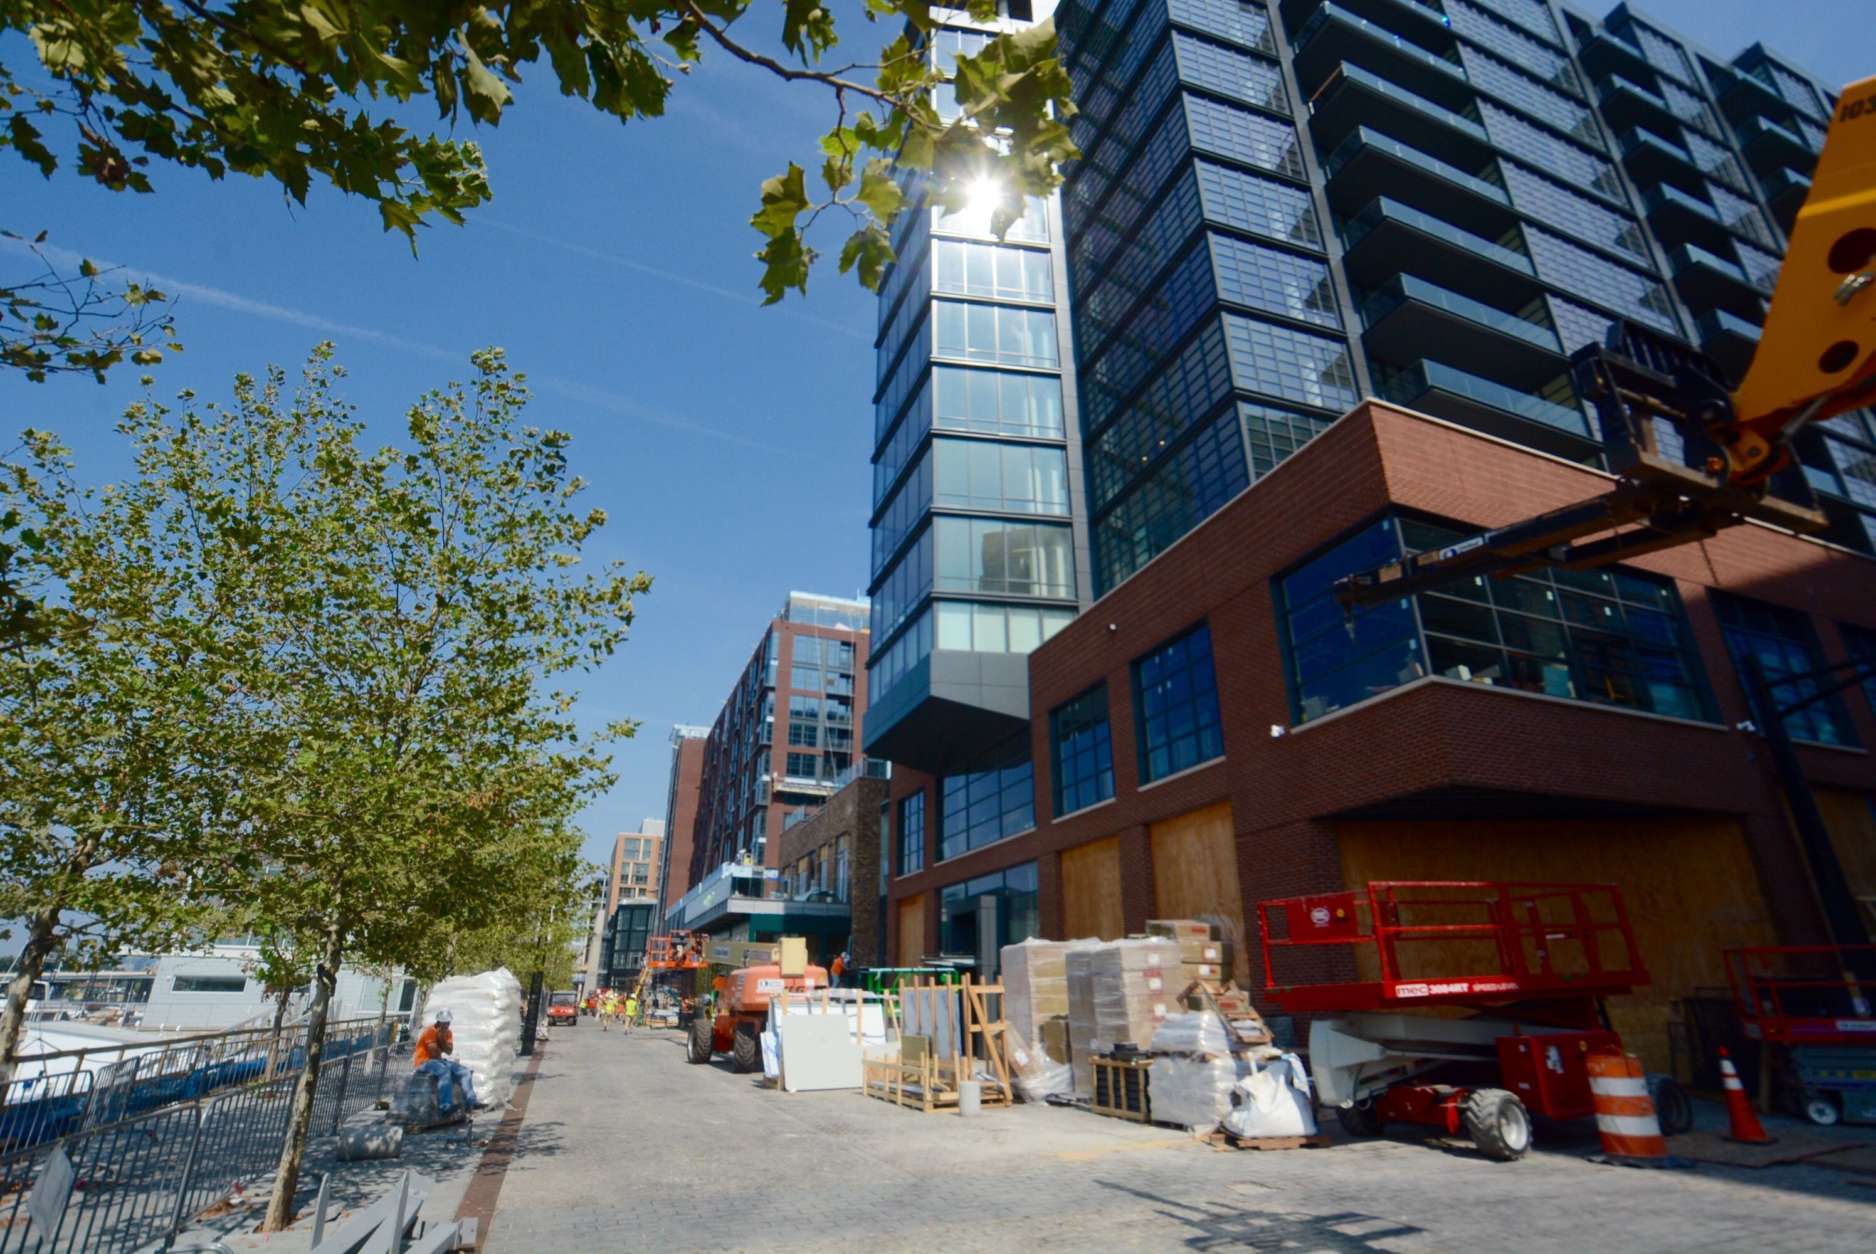 Wharf Street is a main promenade that will connect the development to Washington Channel. (WTOP/Dave Dildine)